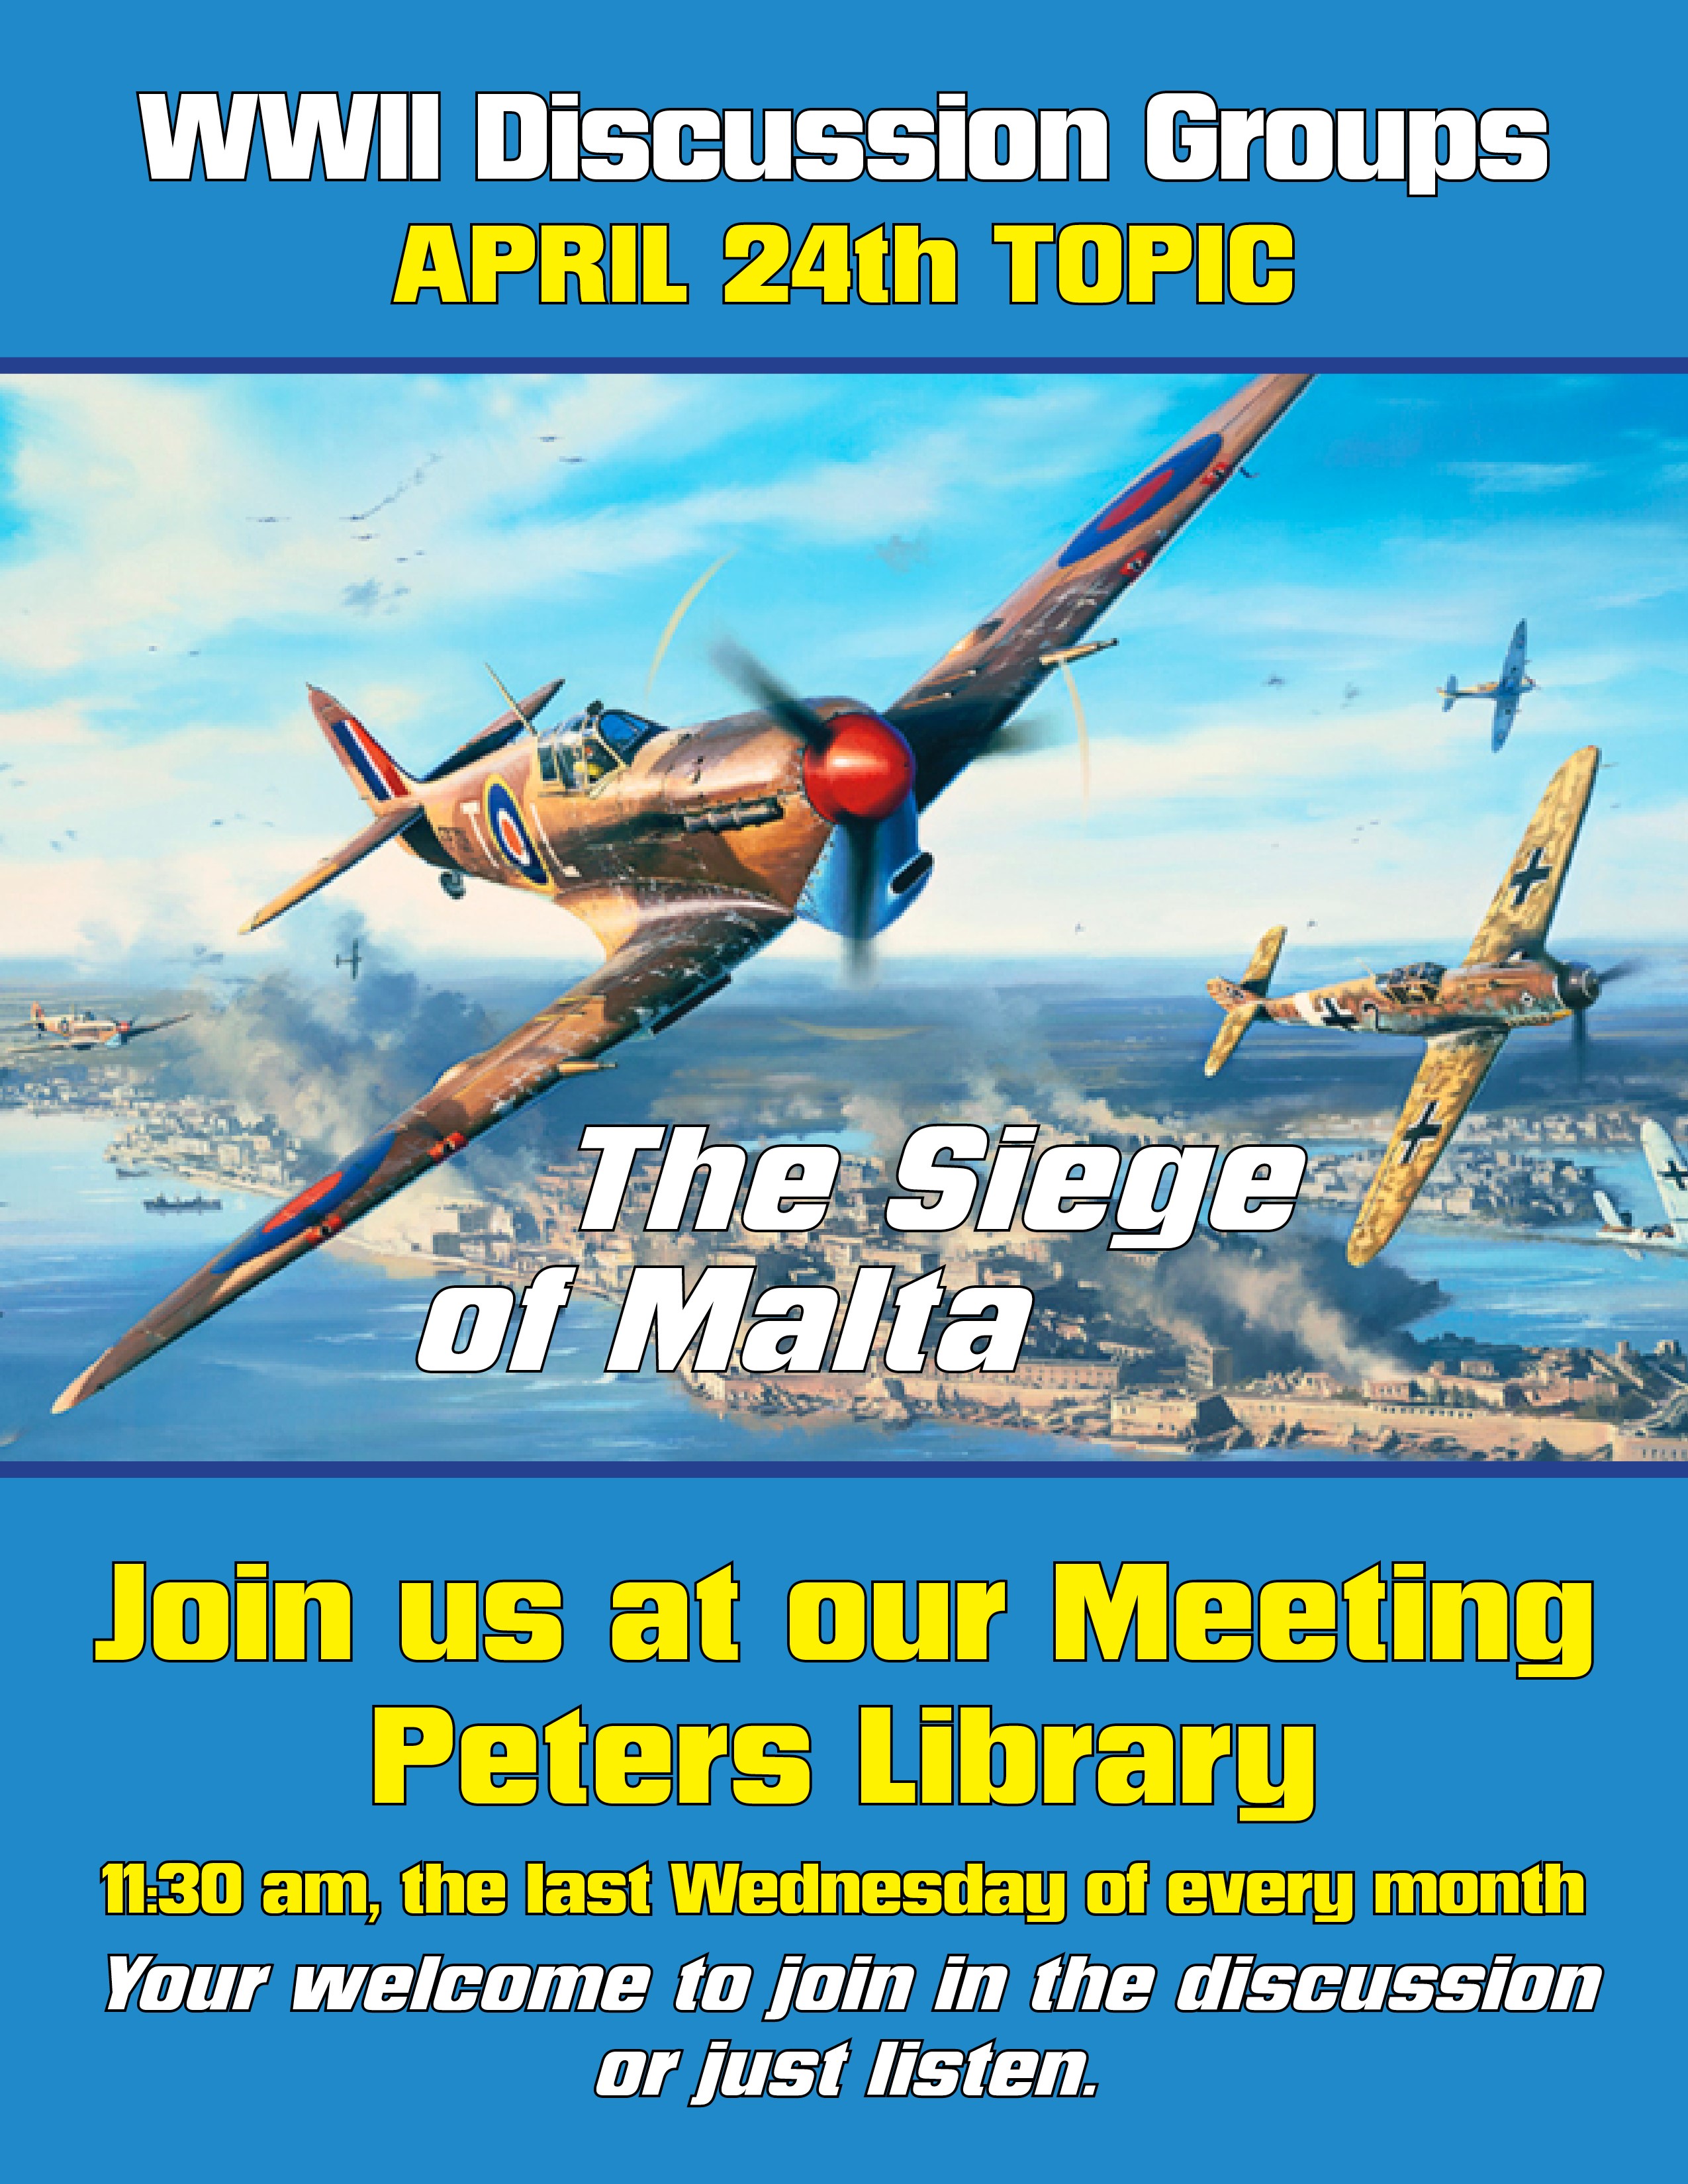 WWII Discussion Group Everybody Welcome April's Discussion Topic The Siege of Malta. Image of planes flying over a city near water with smoke coming up.